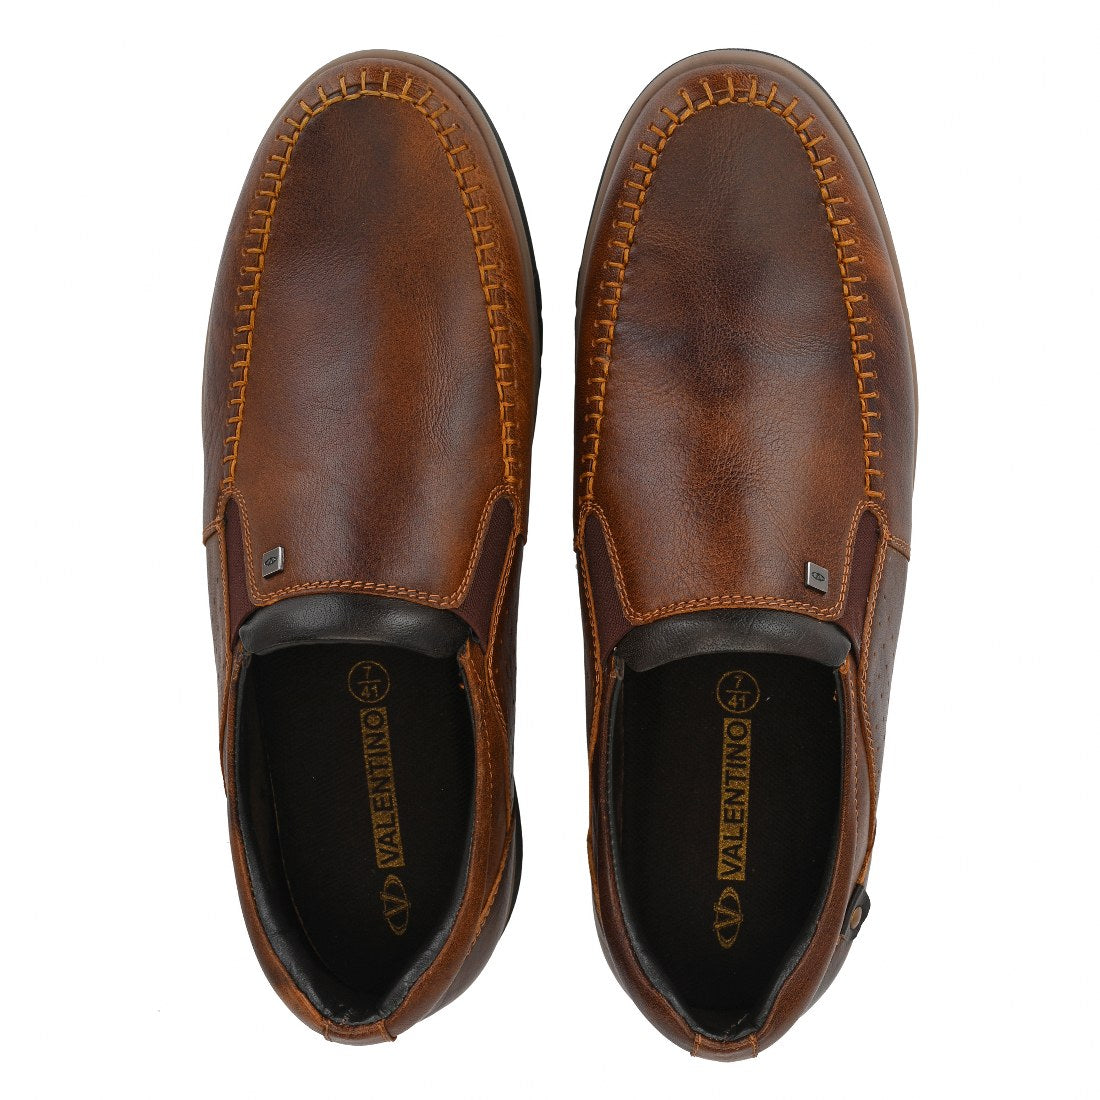 FASCINATE-01 MEN LEATHER TAN-WOOD CASUAL SLIP ON MOCCASSINS